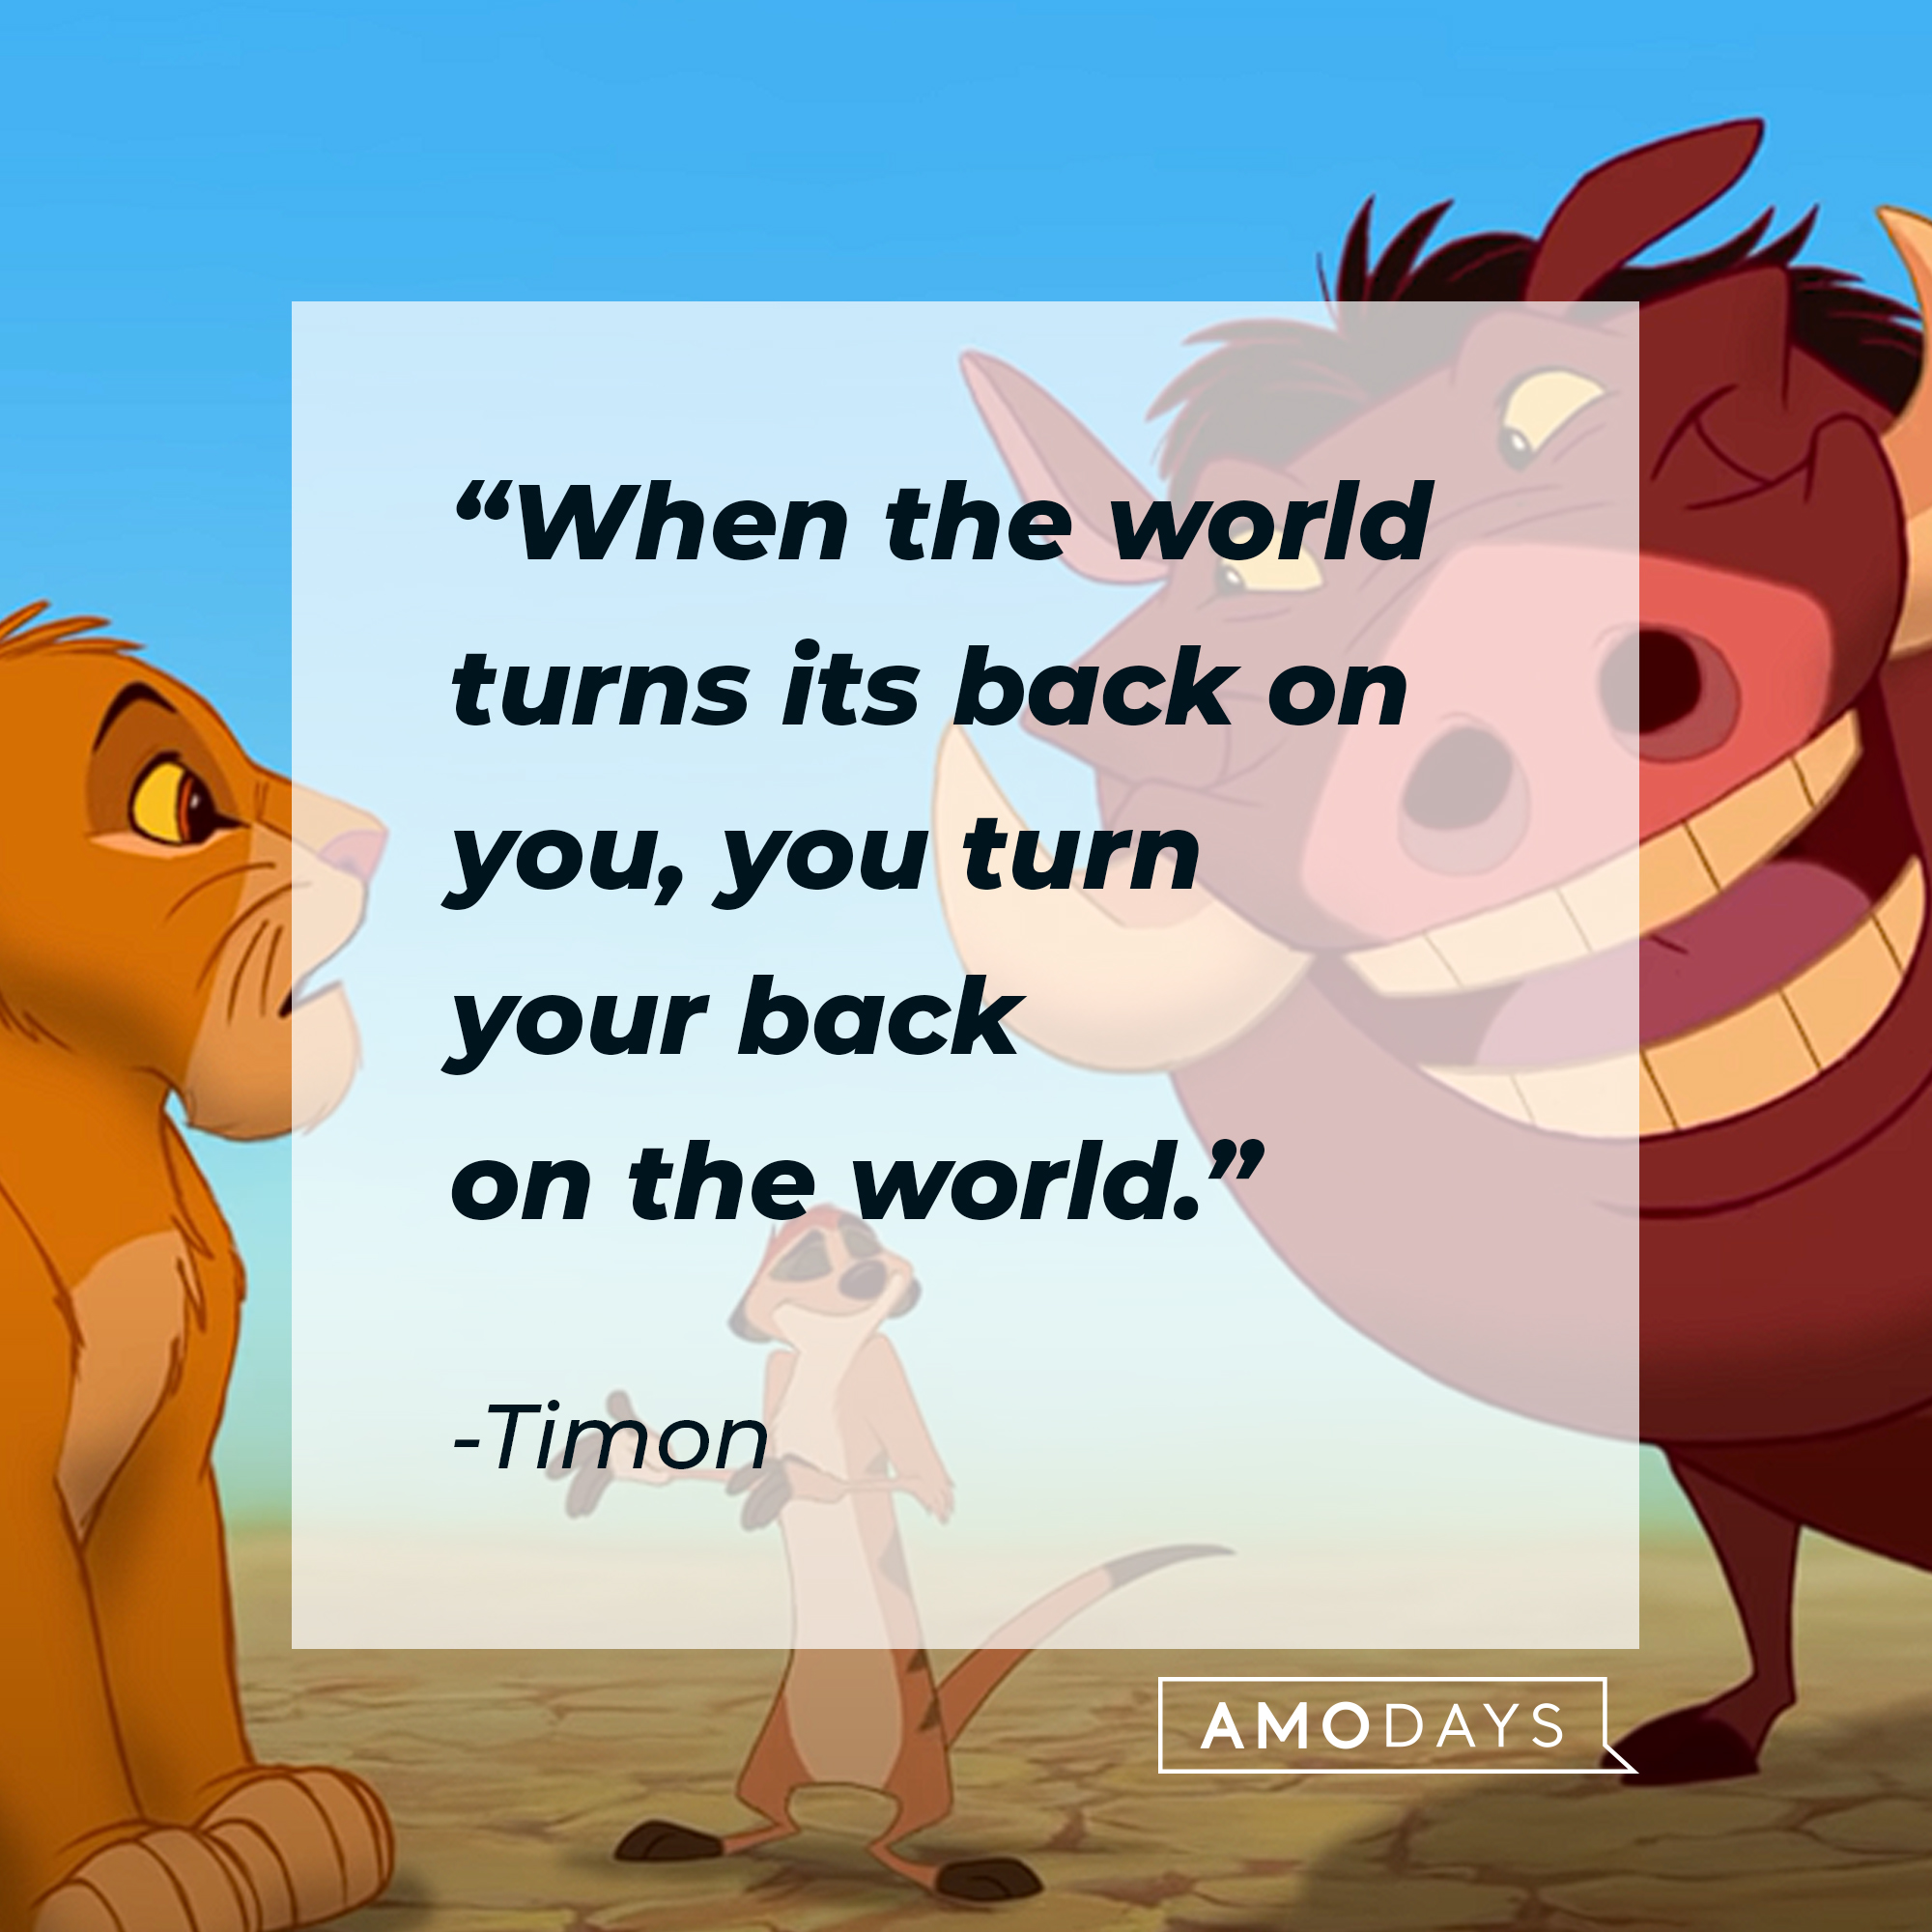 Simba, Pumba, and Timon, with Timon’s quote: “When the world turns its back on you, you turn your back on the world.” | Source: youtube.com/disneyfr